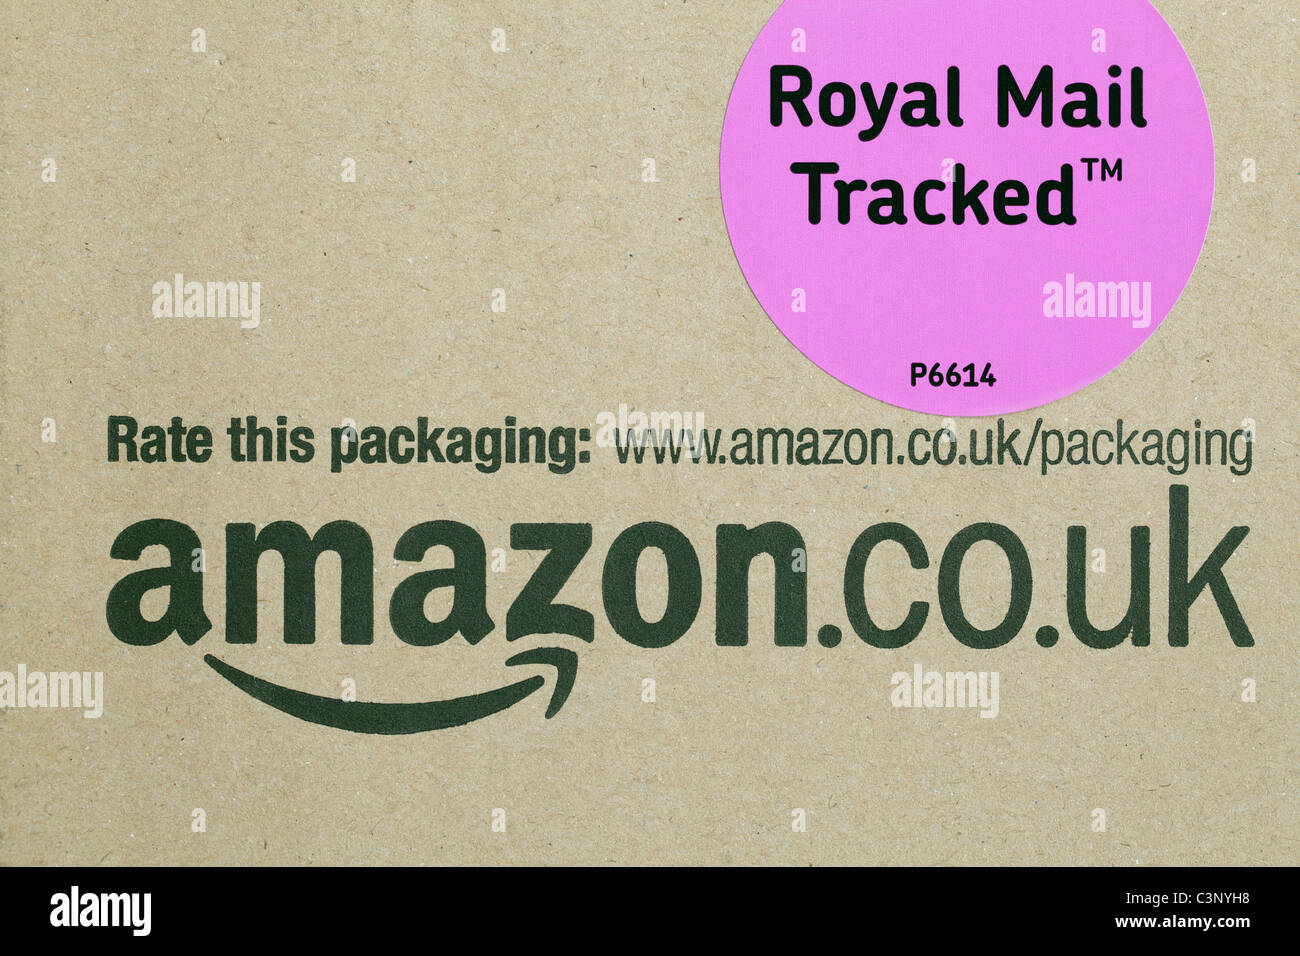 A postage box from amazon.co.uk tracked by Royal Mail, UK Stock Photo